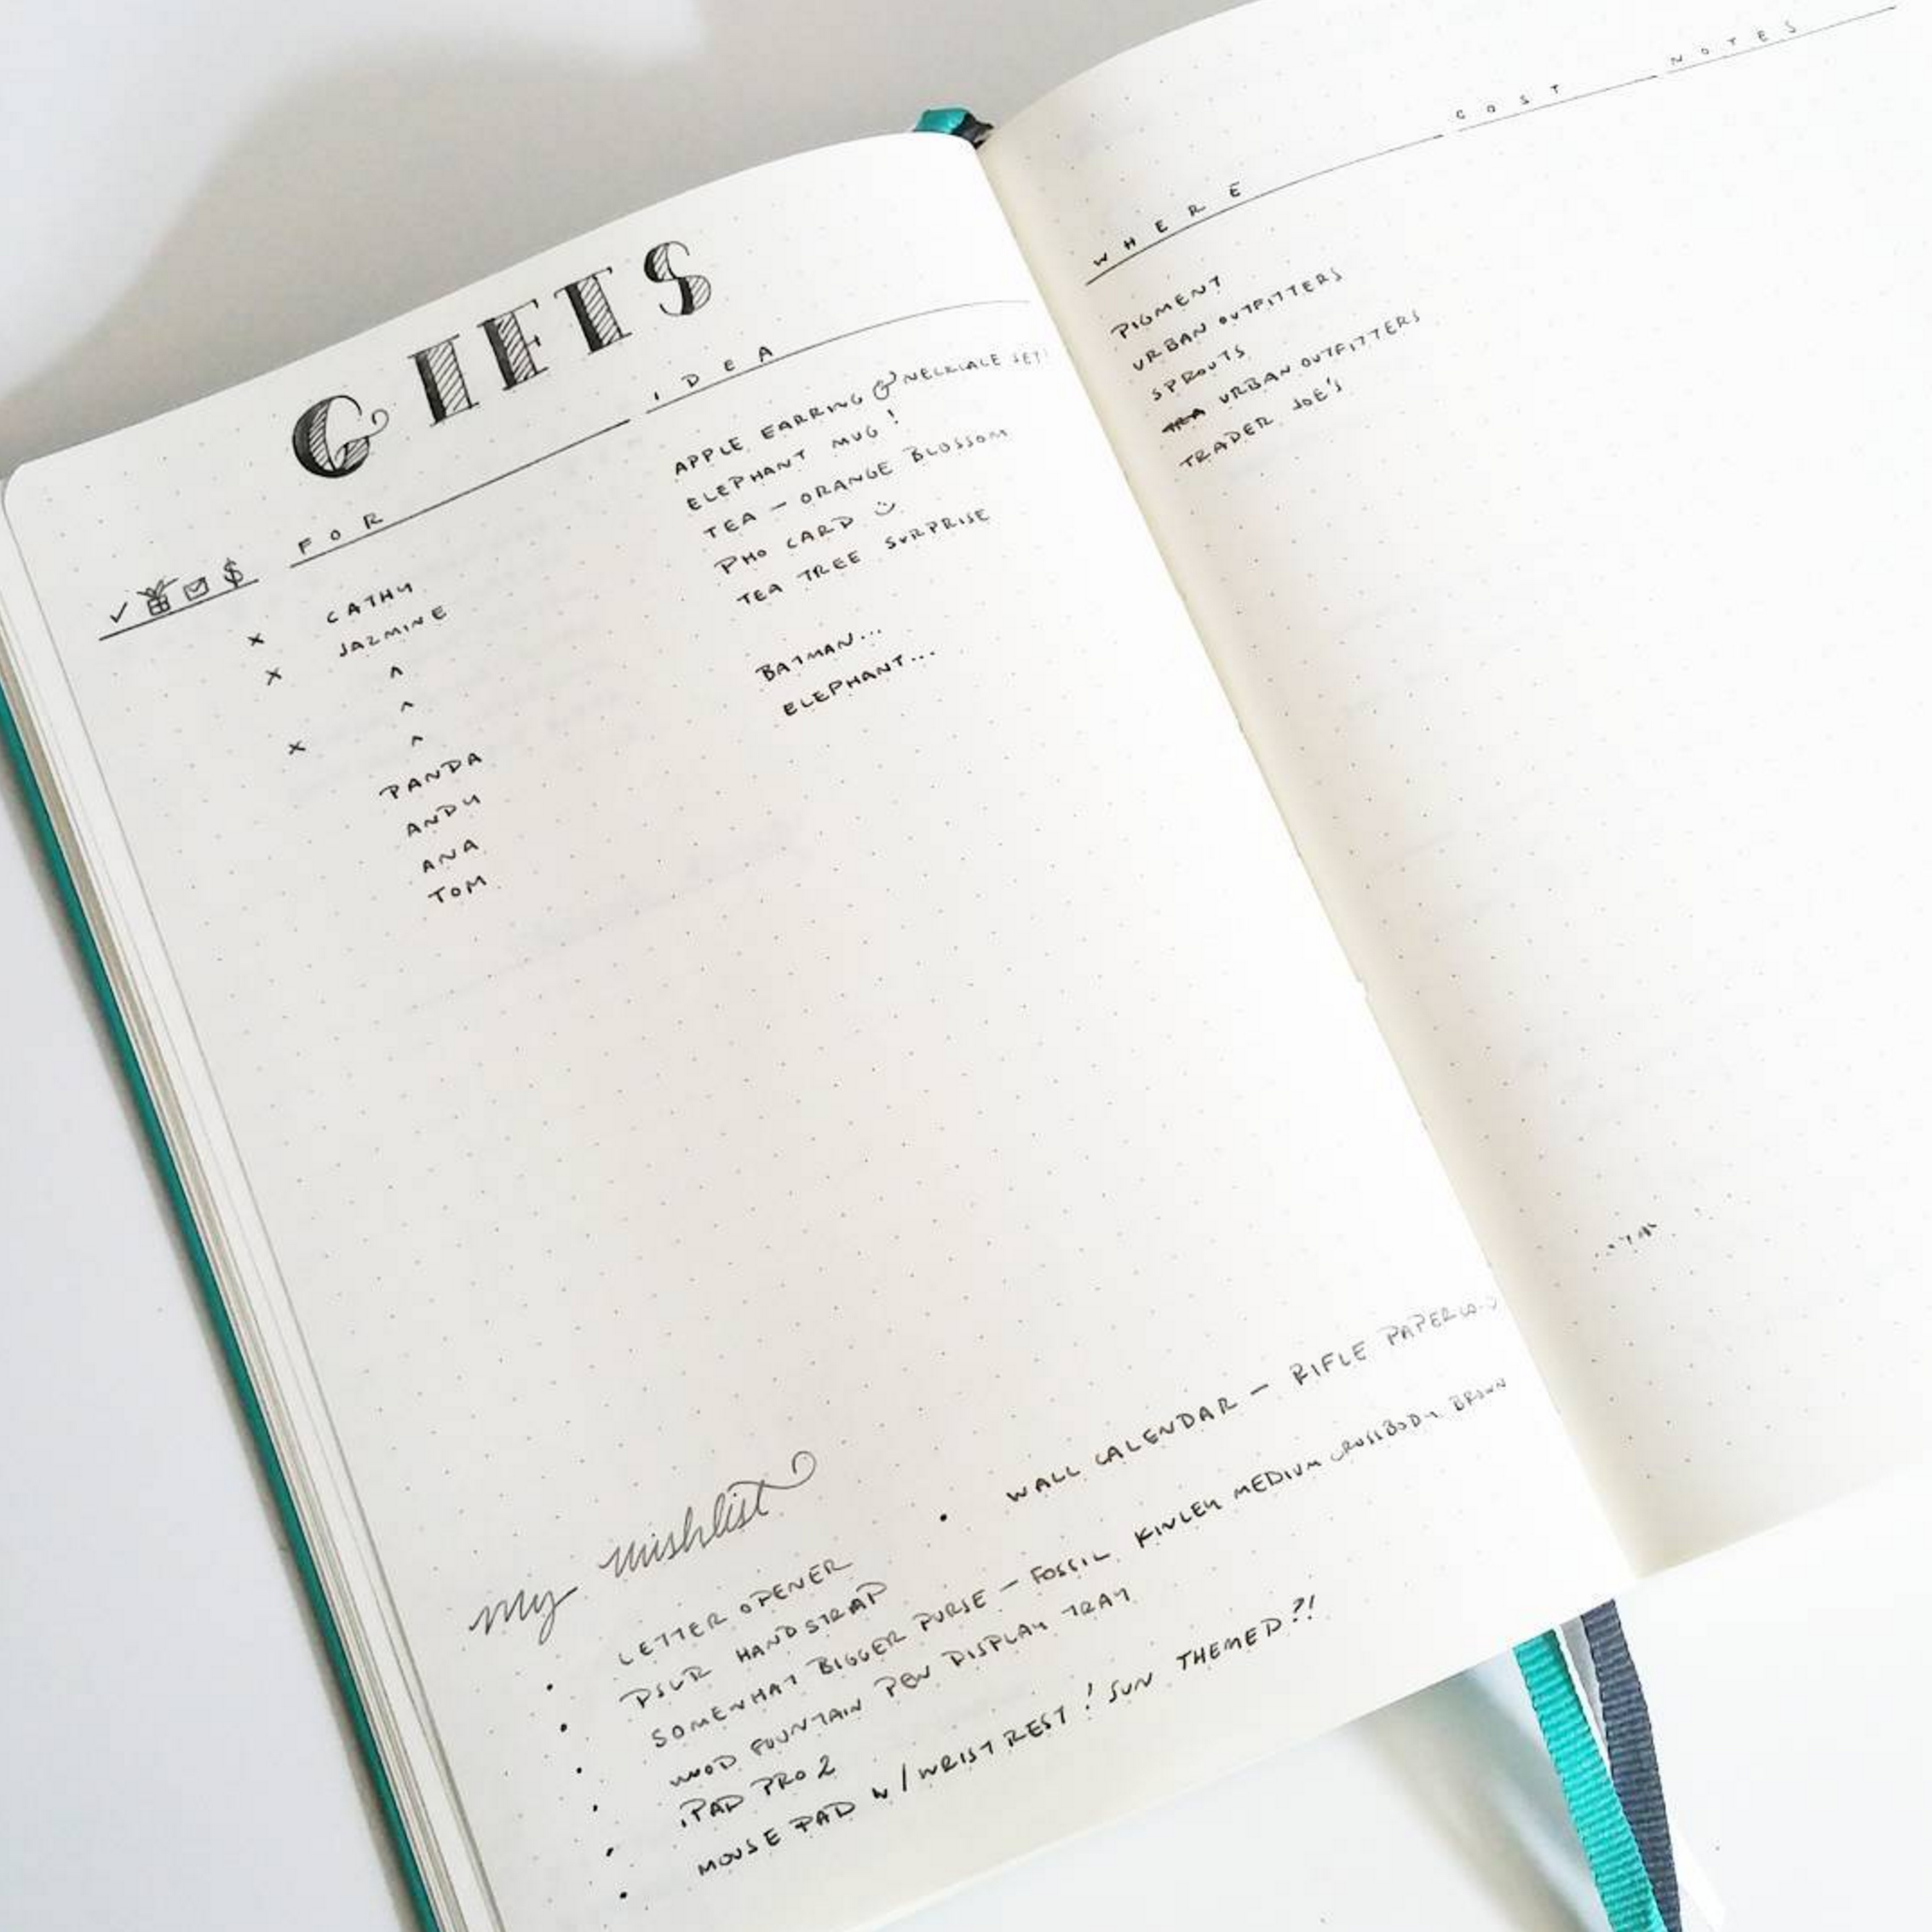 #100DaysOfBulletJournalIdeas: 27 - Keep a Gift List with Ideas in your ...